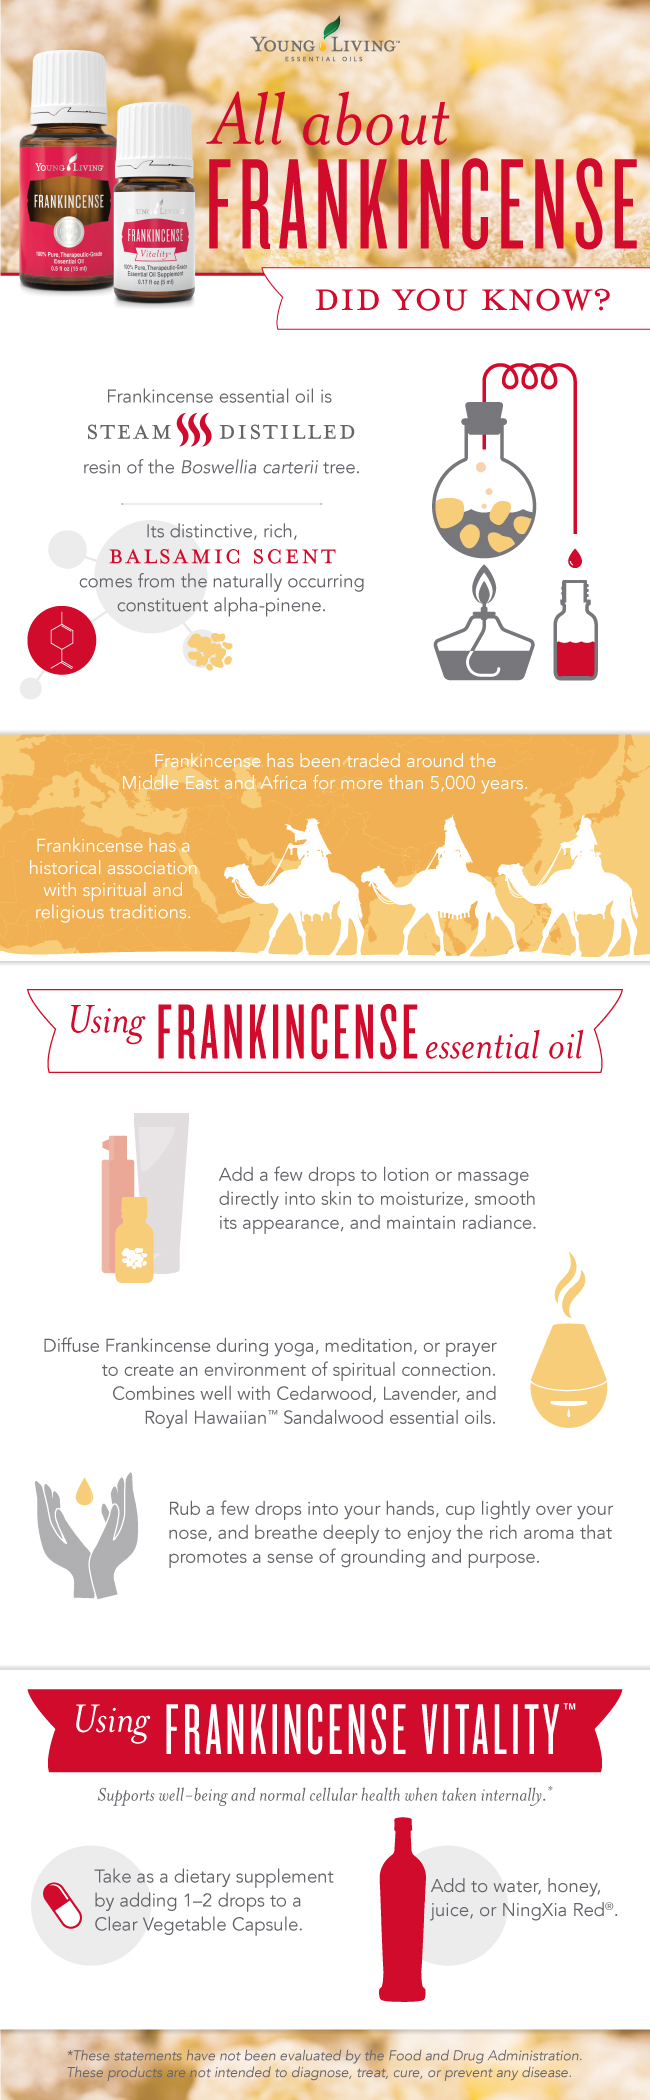 5 Frankincense Oil Benefits Scientists Want You to Know – The